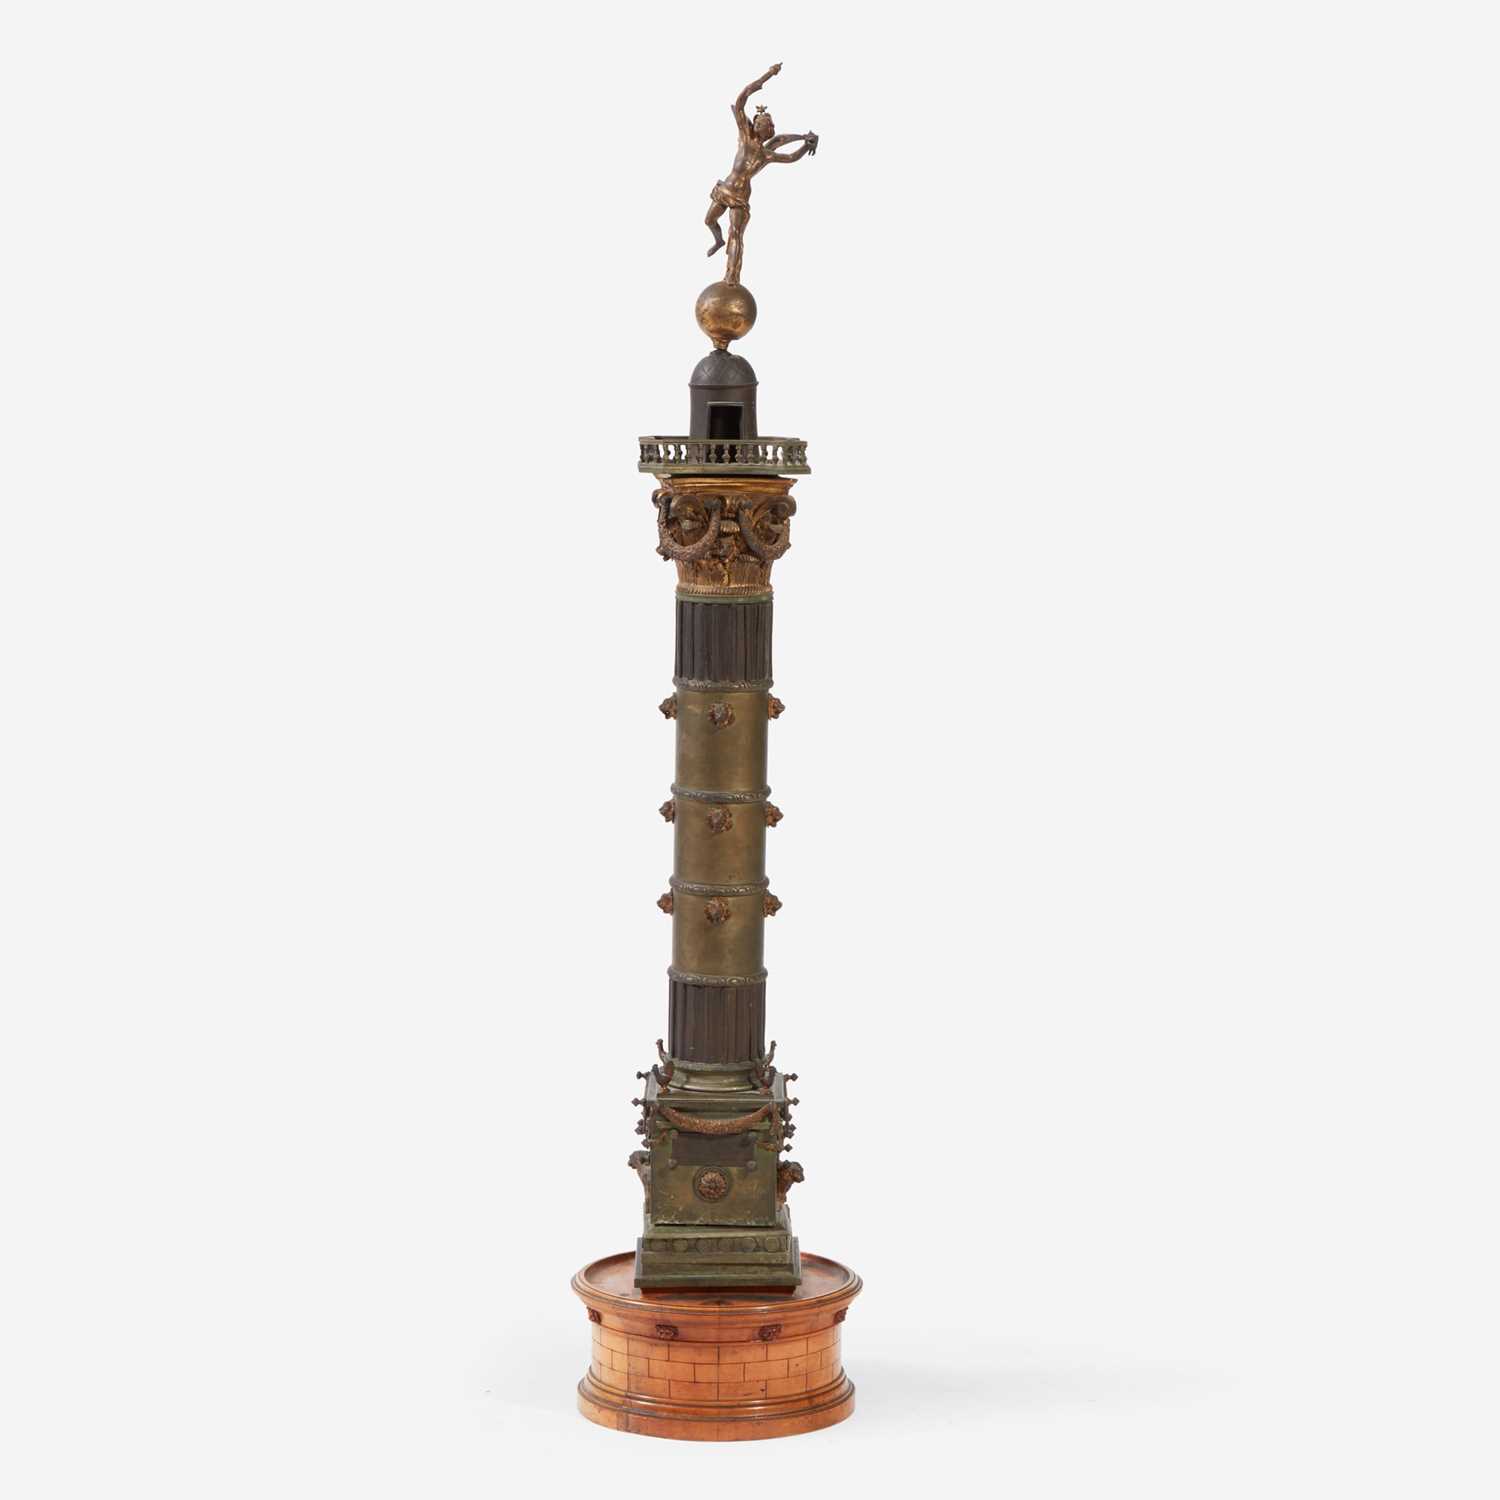 Lot 60 - A Large Grand Tour Bronze Model of the July Column